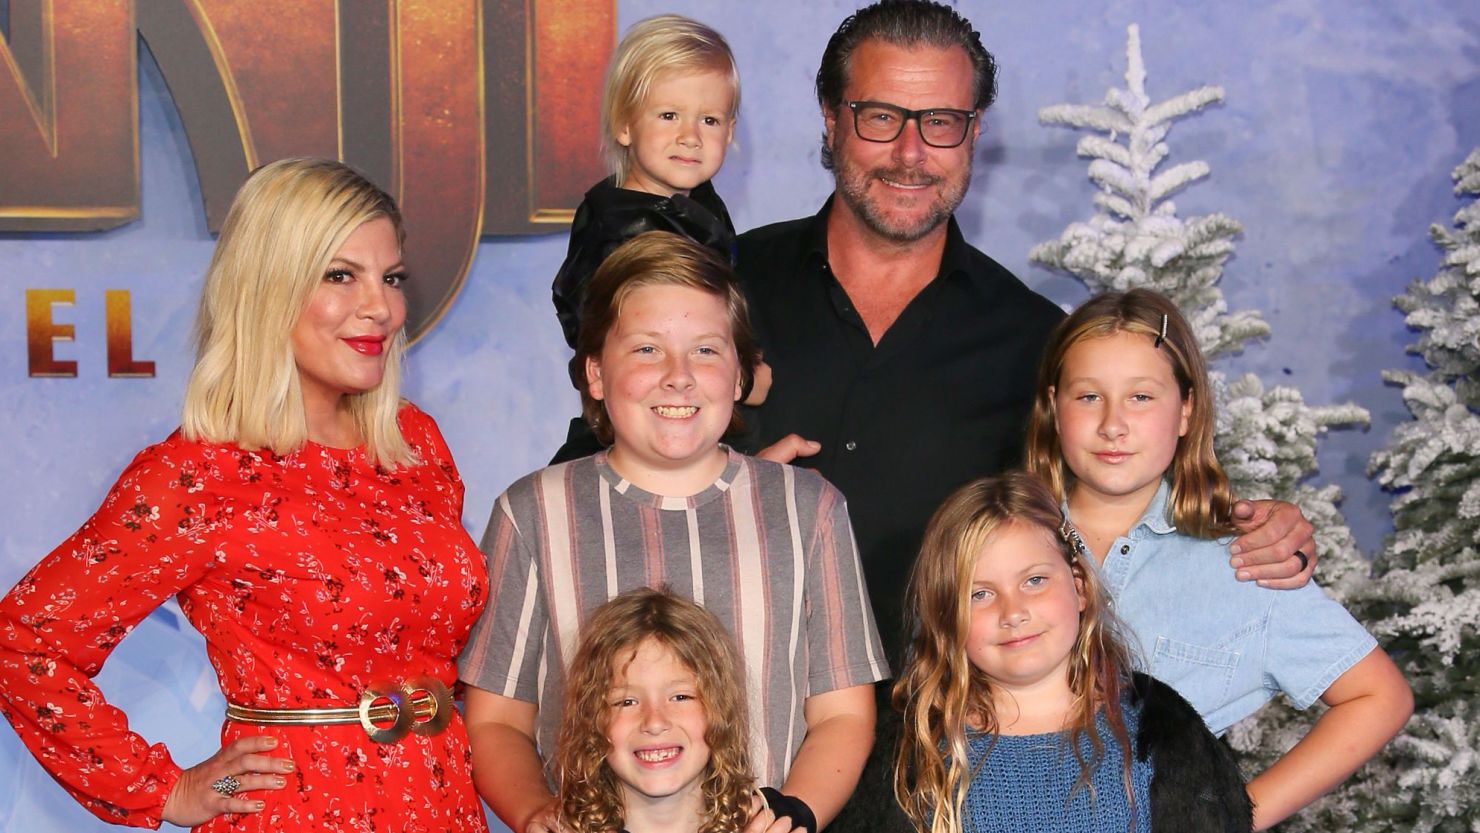 Tori Spelling and Dean McDermott have five children, aged 4 to 14.